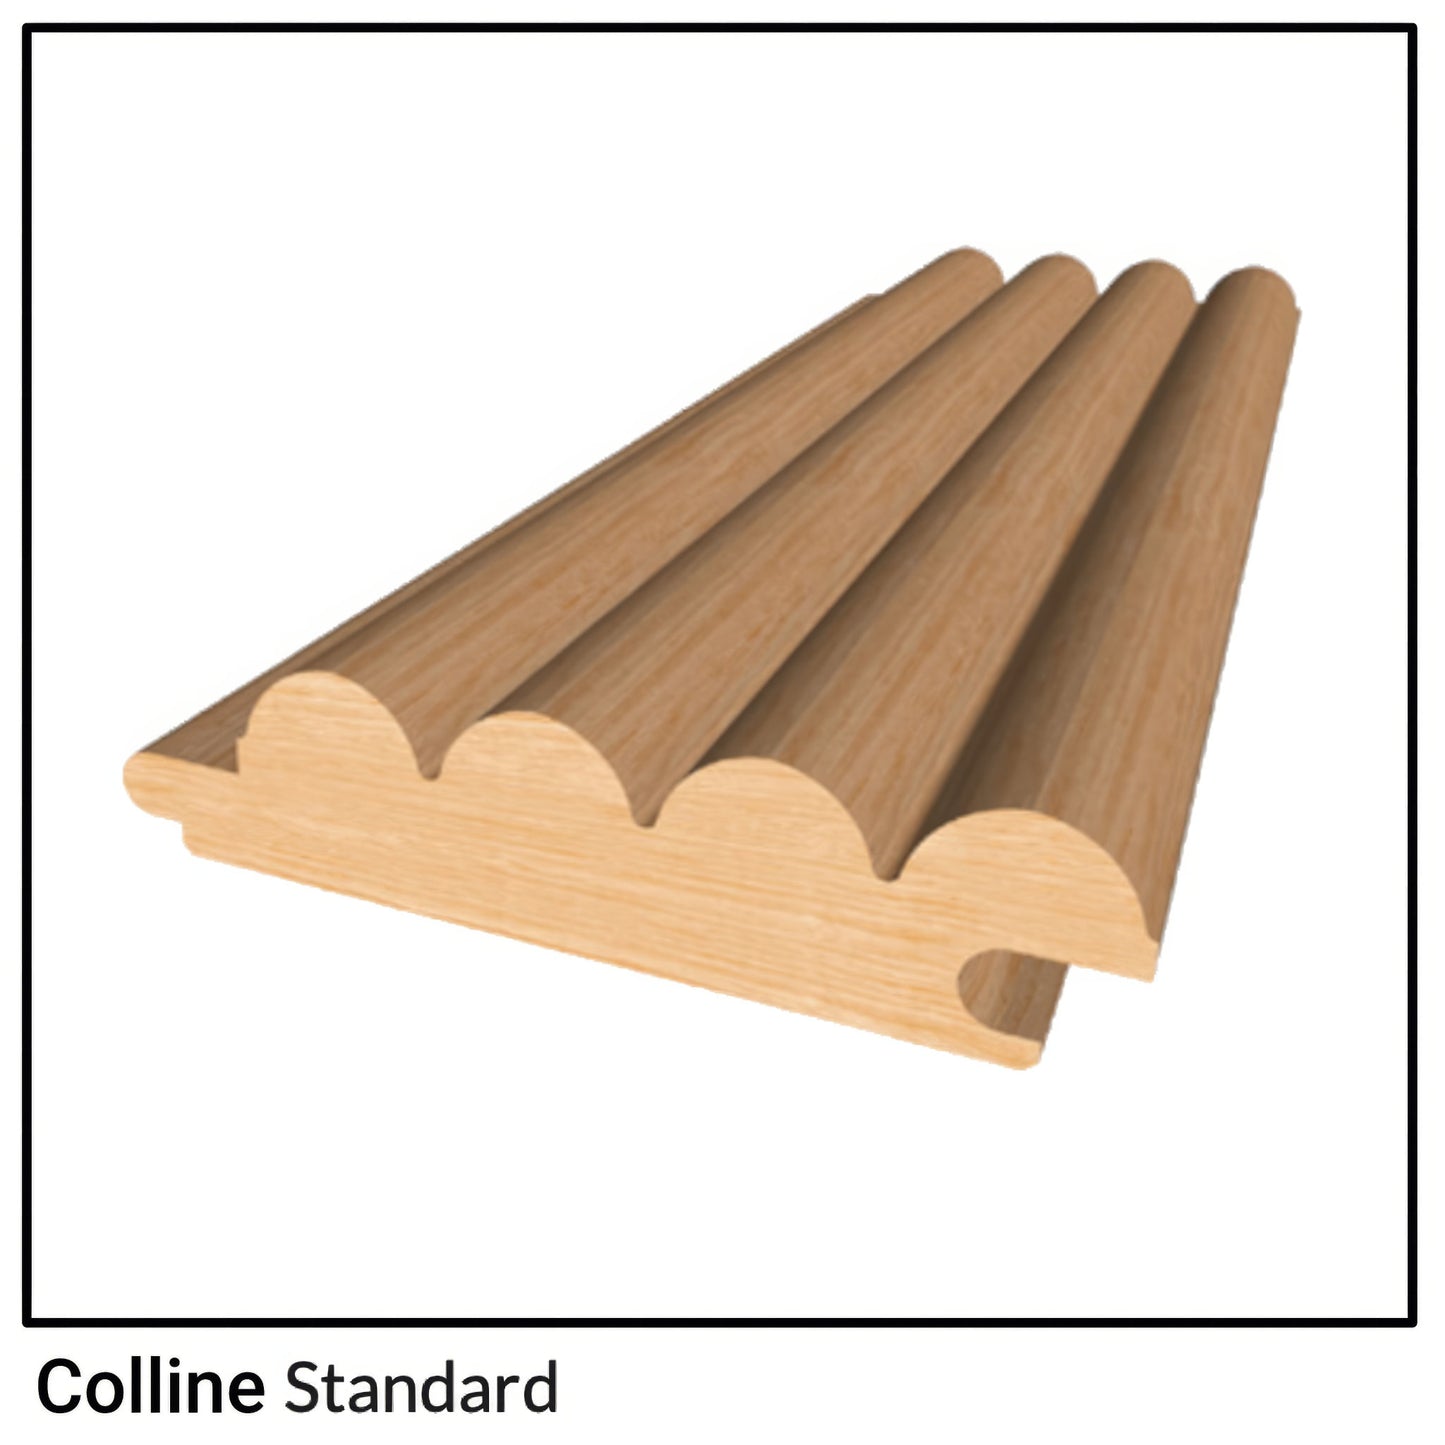 Solid wood moldings - Profile collection